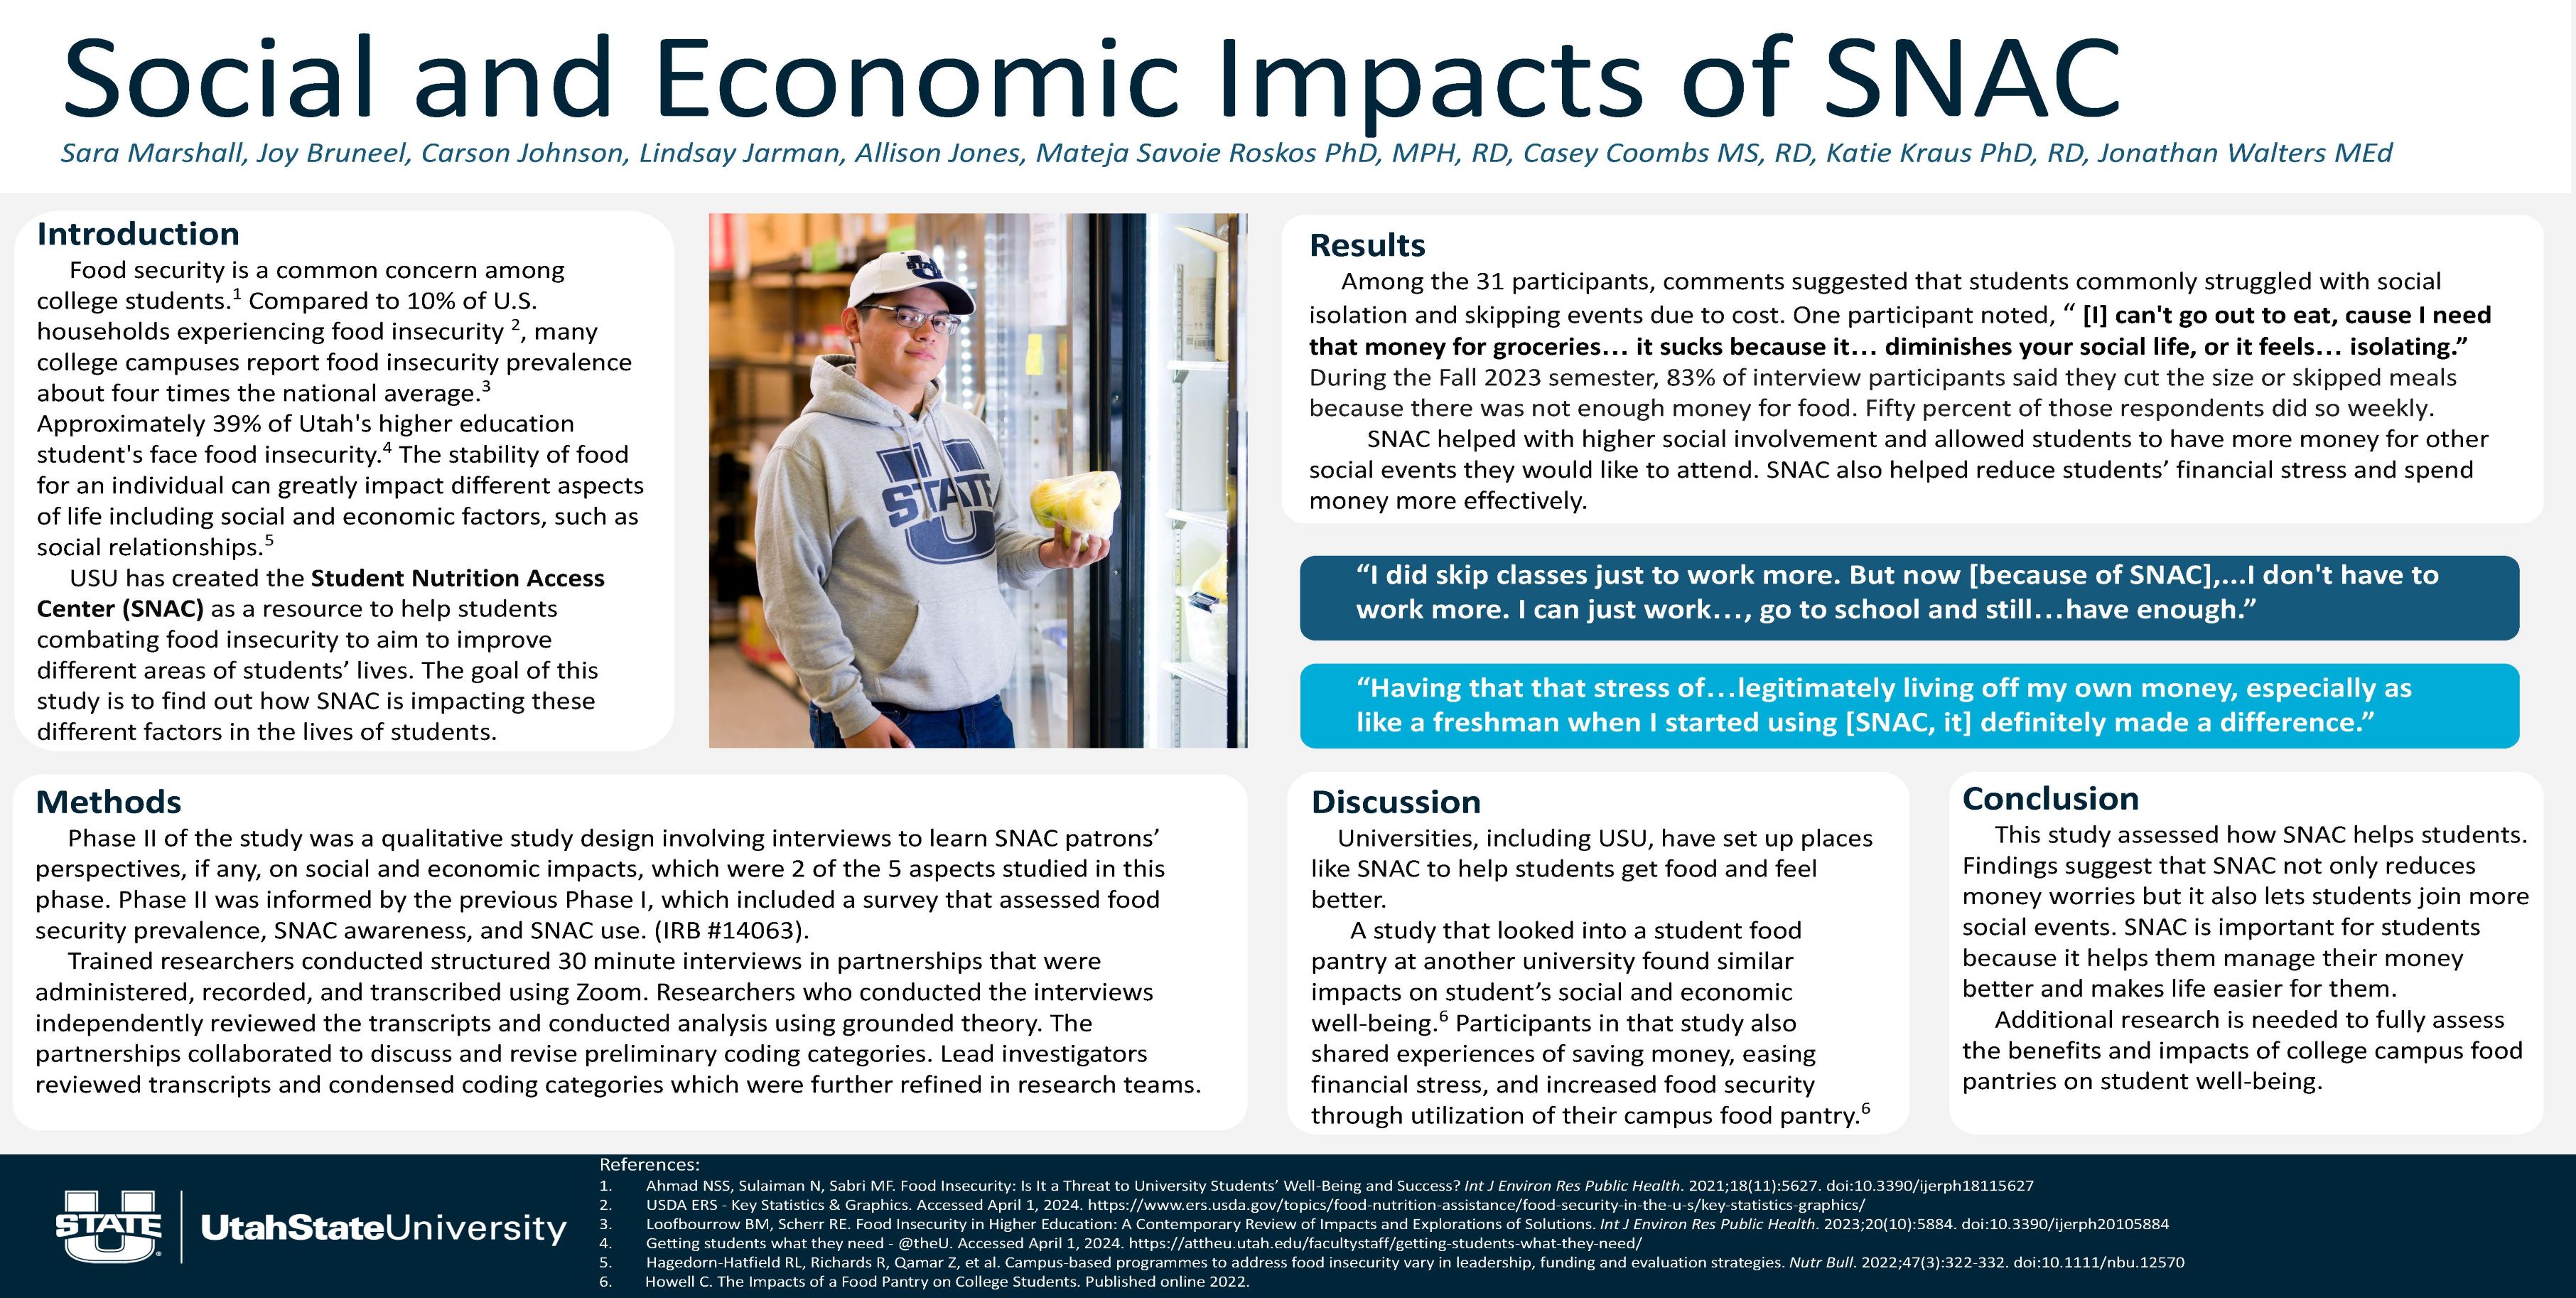 This study assessed how SNAC helps students. Findings suggest that SNAC not only reduces money worries but it also lets students join more social events. SNAC is important for students because it helps them manage their money better and makes life easier for them.